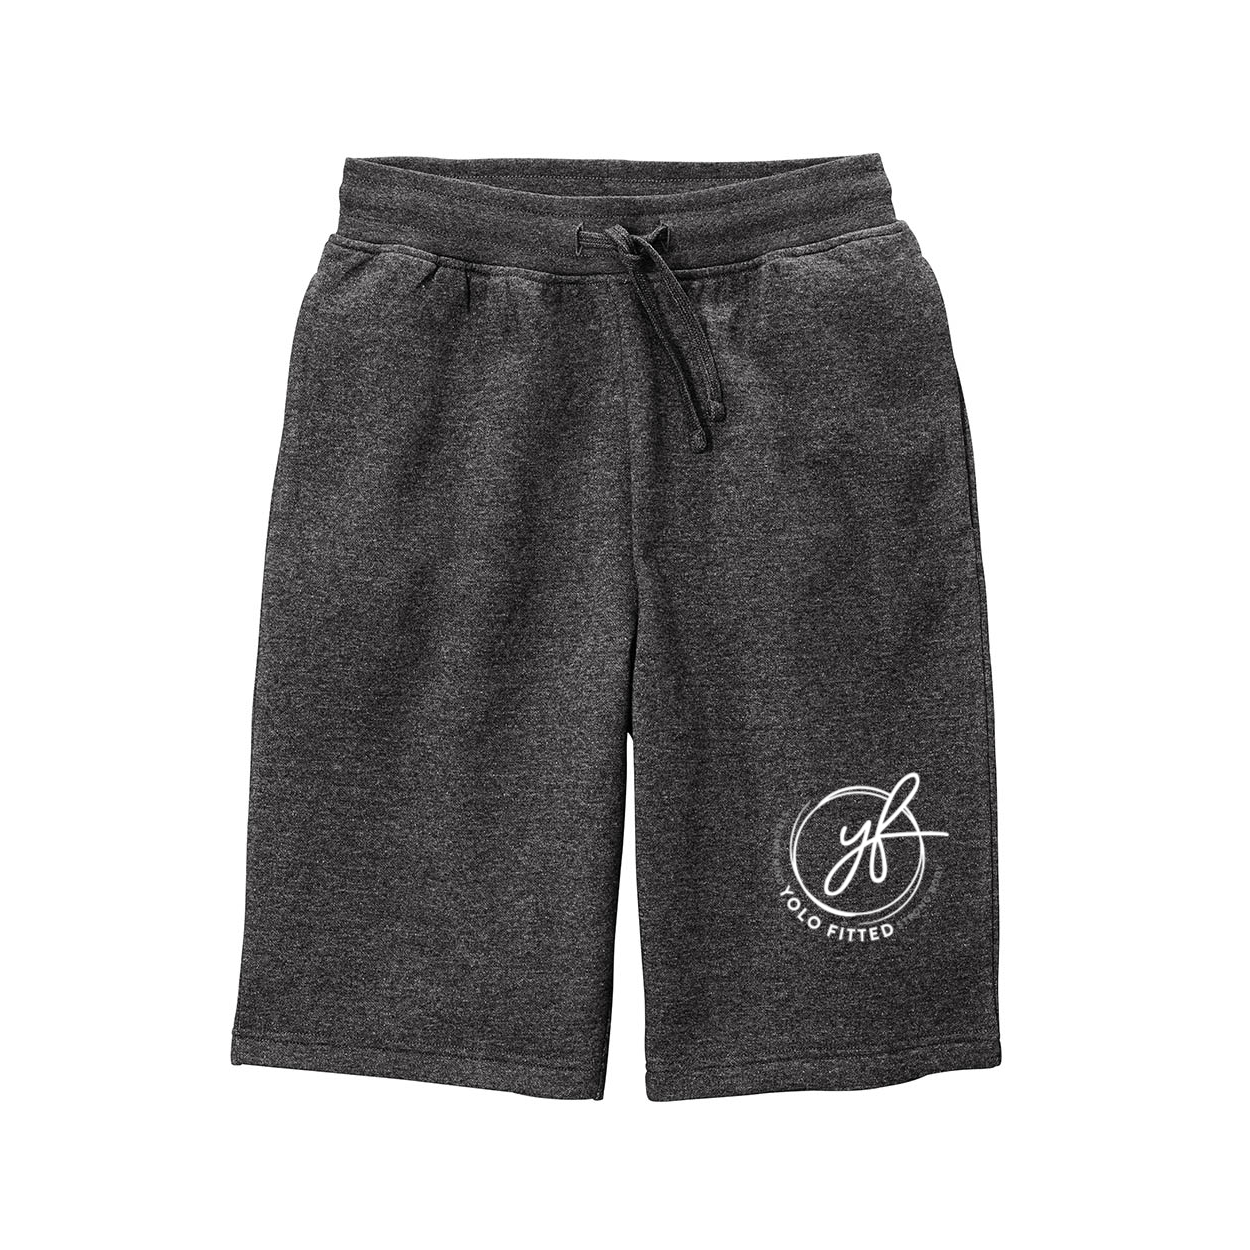 YOLO FITTED SIGNATURE MEN'S FLEECE SHORTS - Yolofitted